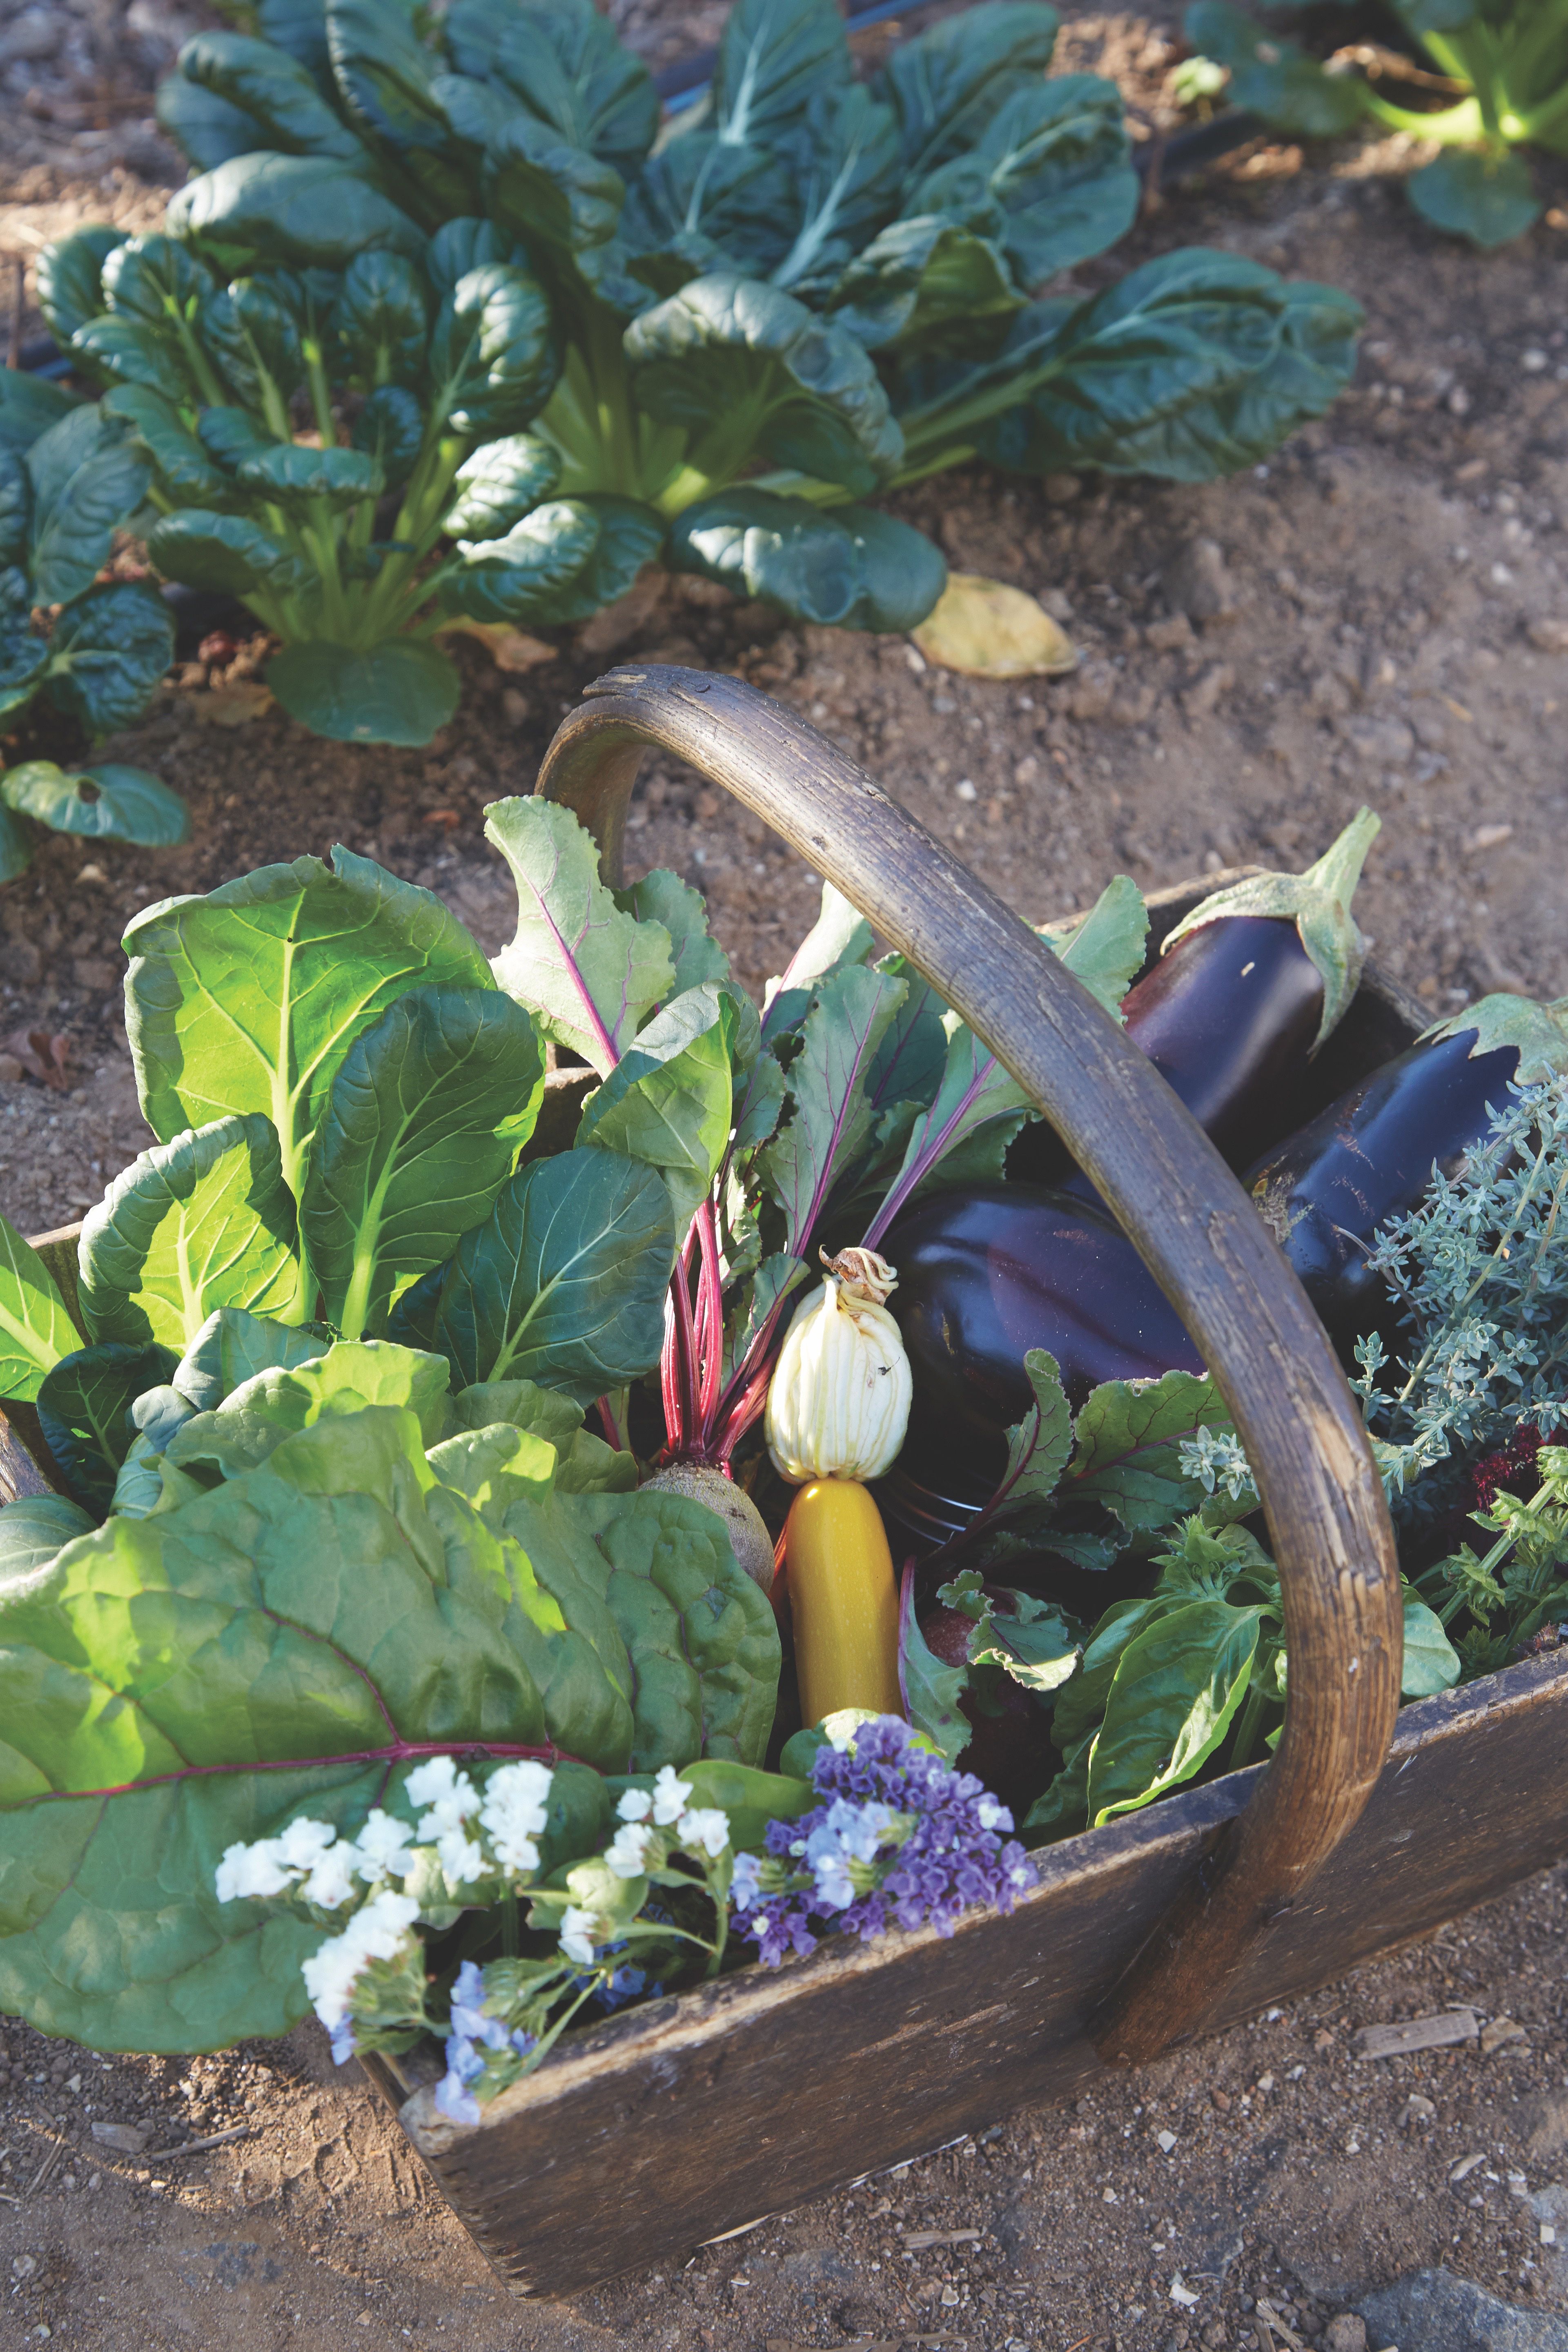 garden vegetables in a wooden crate with handle